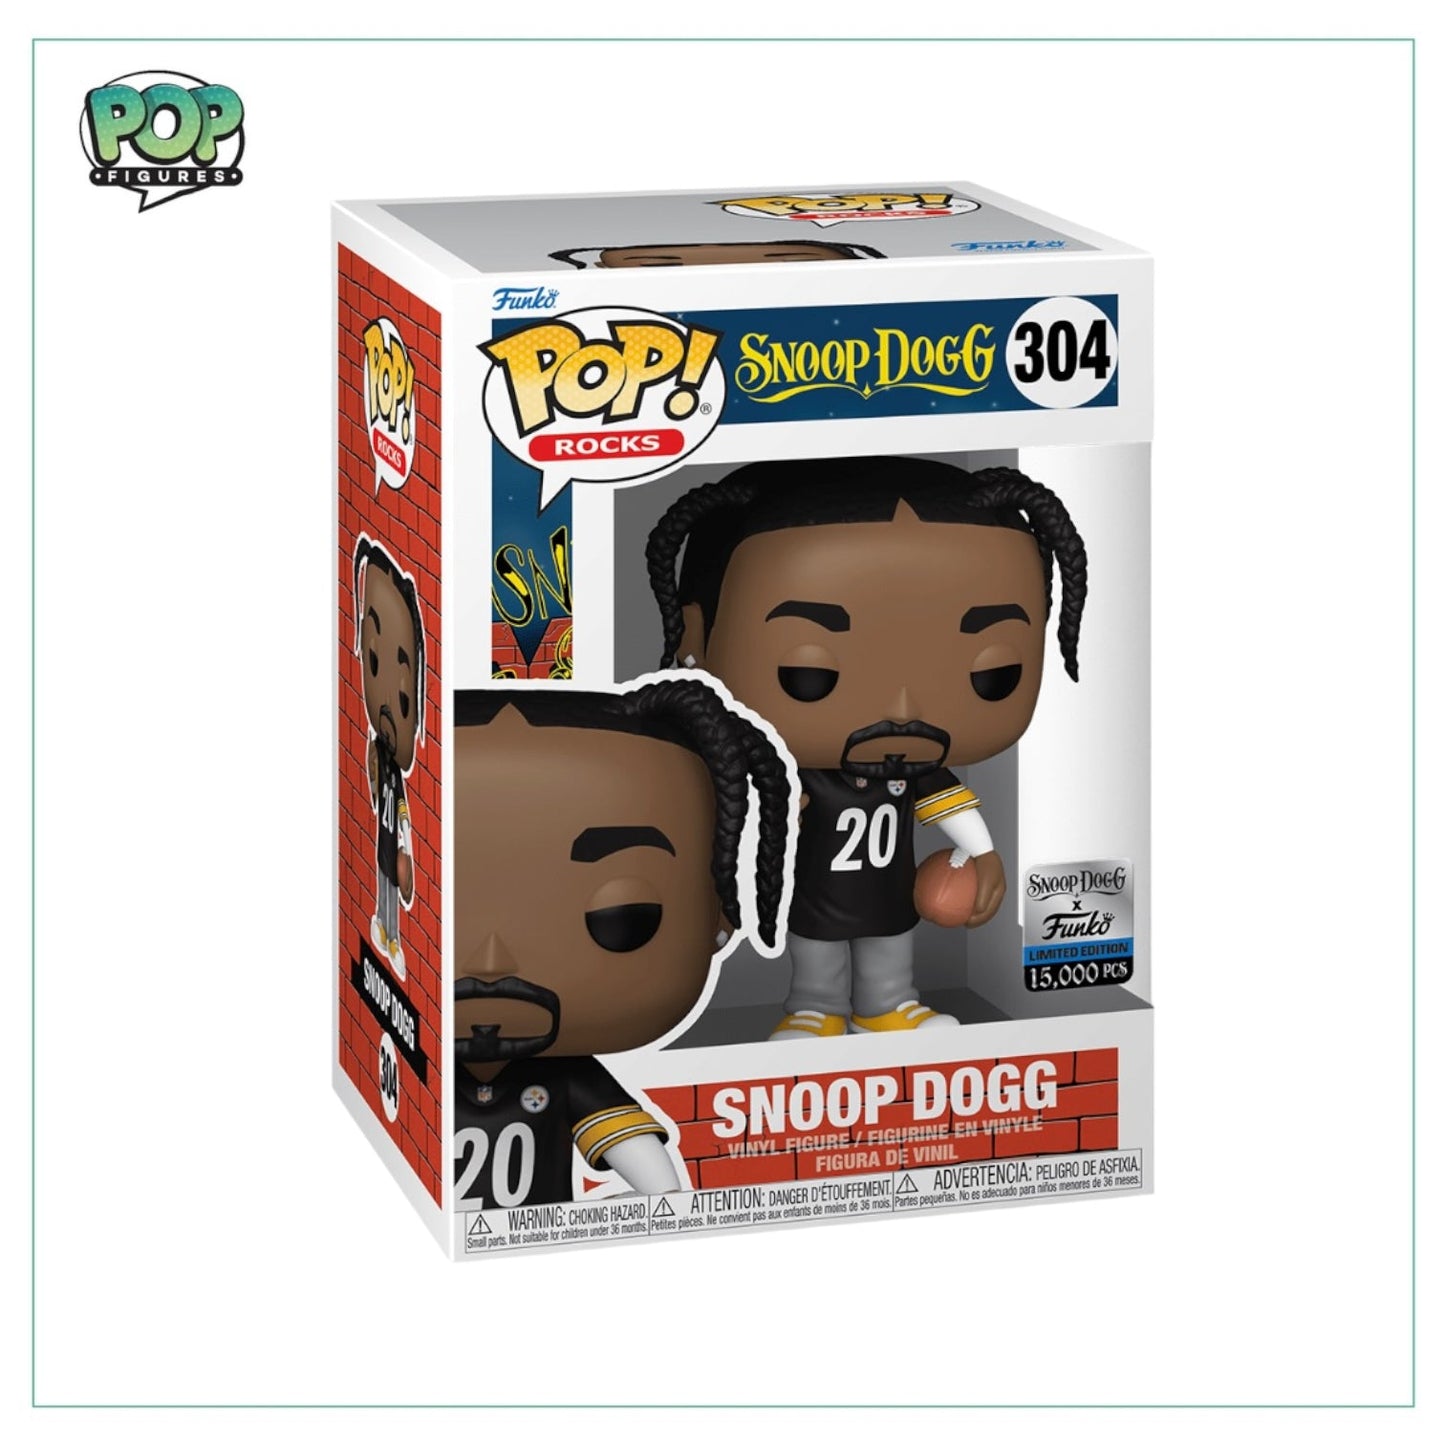 Snoop Dogg #304 (Steelers Jersey) Funko Pop! - Rocks - The Dogg House x Funko Exclusive LE15000 Pcs - Angry Cat